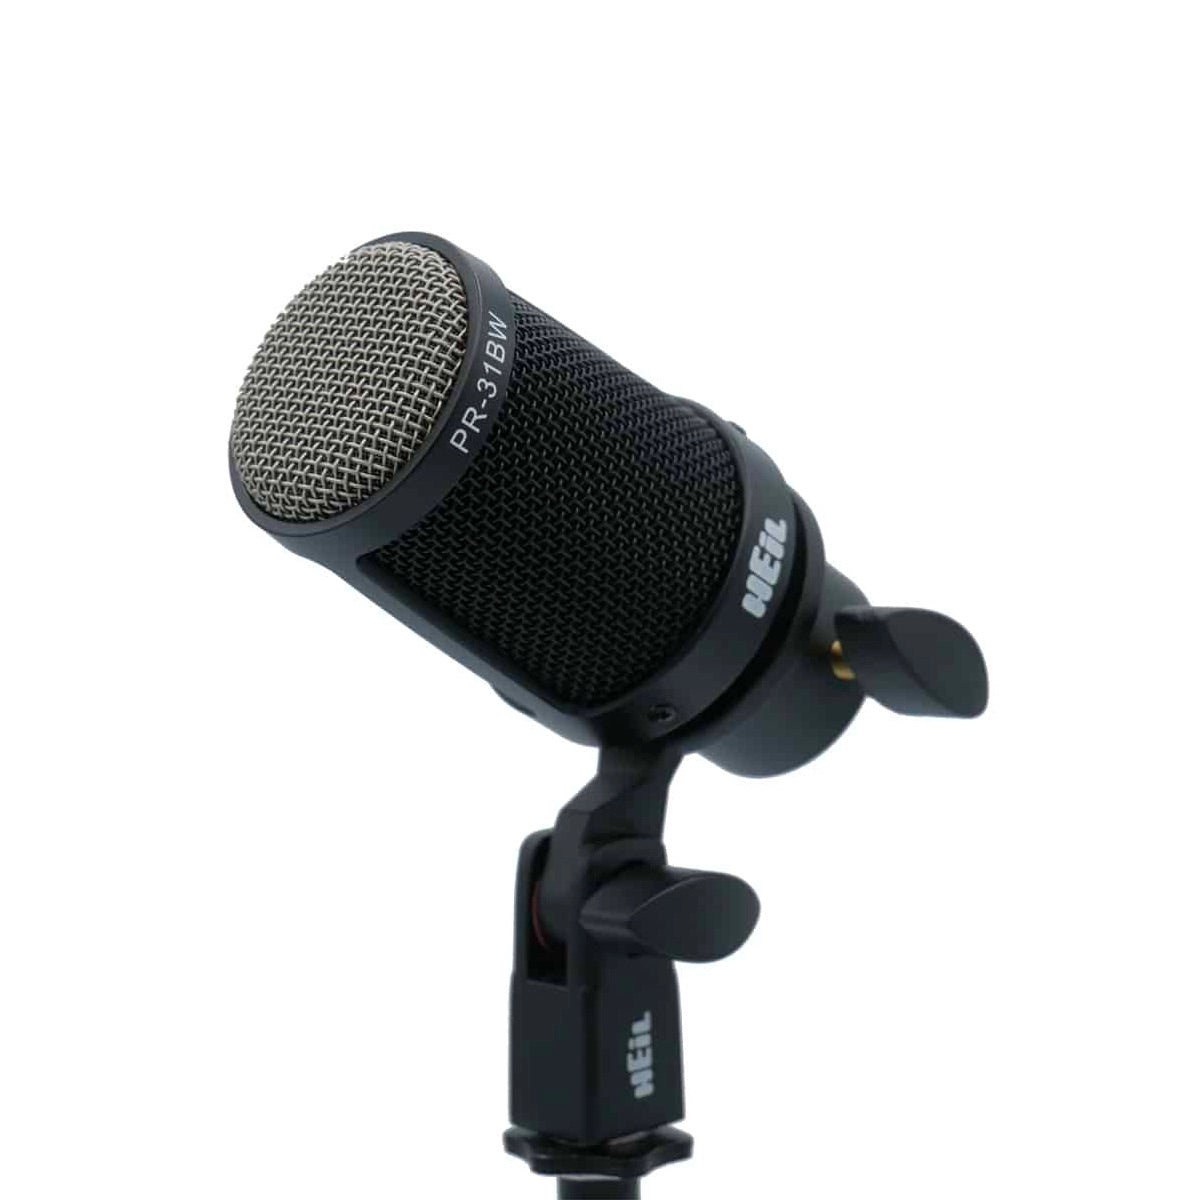 Heil PR 31 BW Large Diaphragm Dynamic Microphone, mounted on a mic stand, angle view